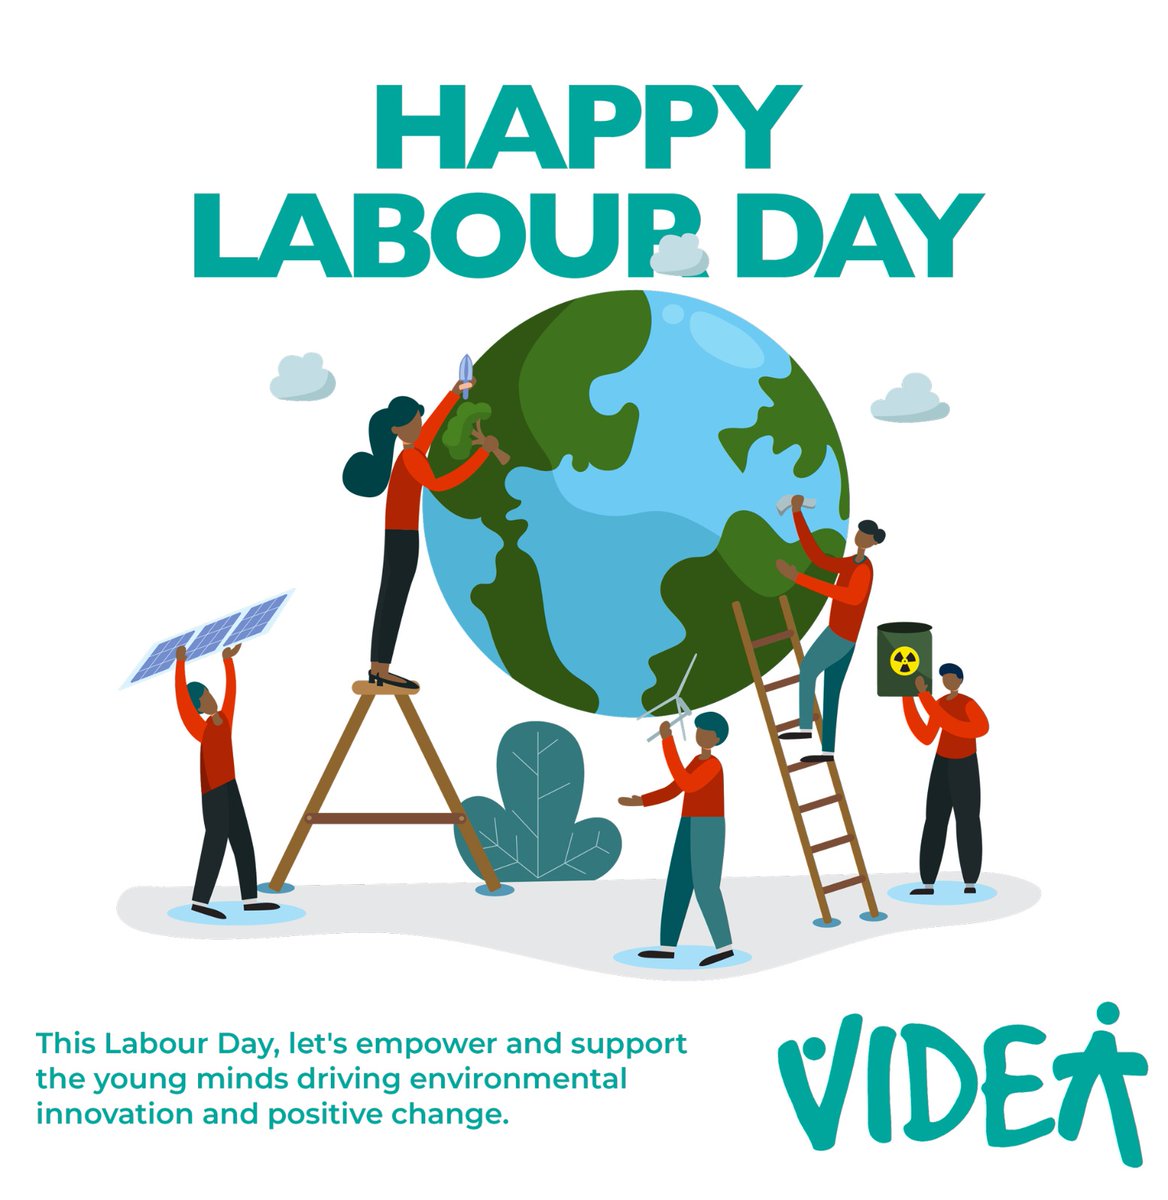 Happy International Labour Day!🛠 ⚖️As we celebrate this day, let's stand in solidarity with workers across the world & advocate for fair wages, safe working conditions, and respect for their rights, especially young people & women. #LabourDay2024 #WorkersRights